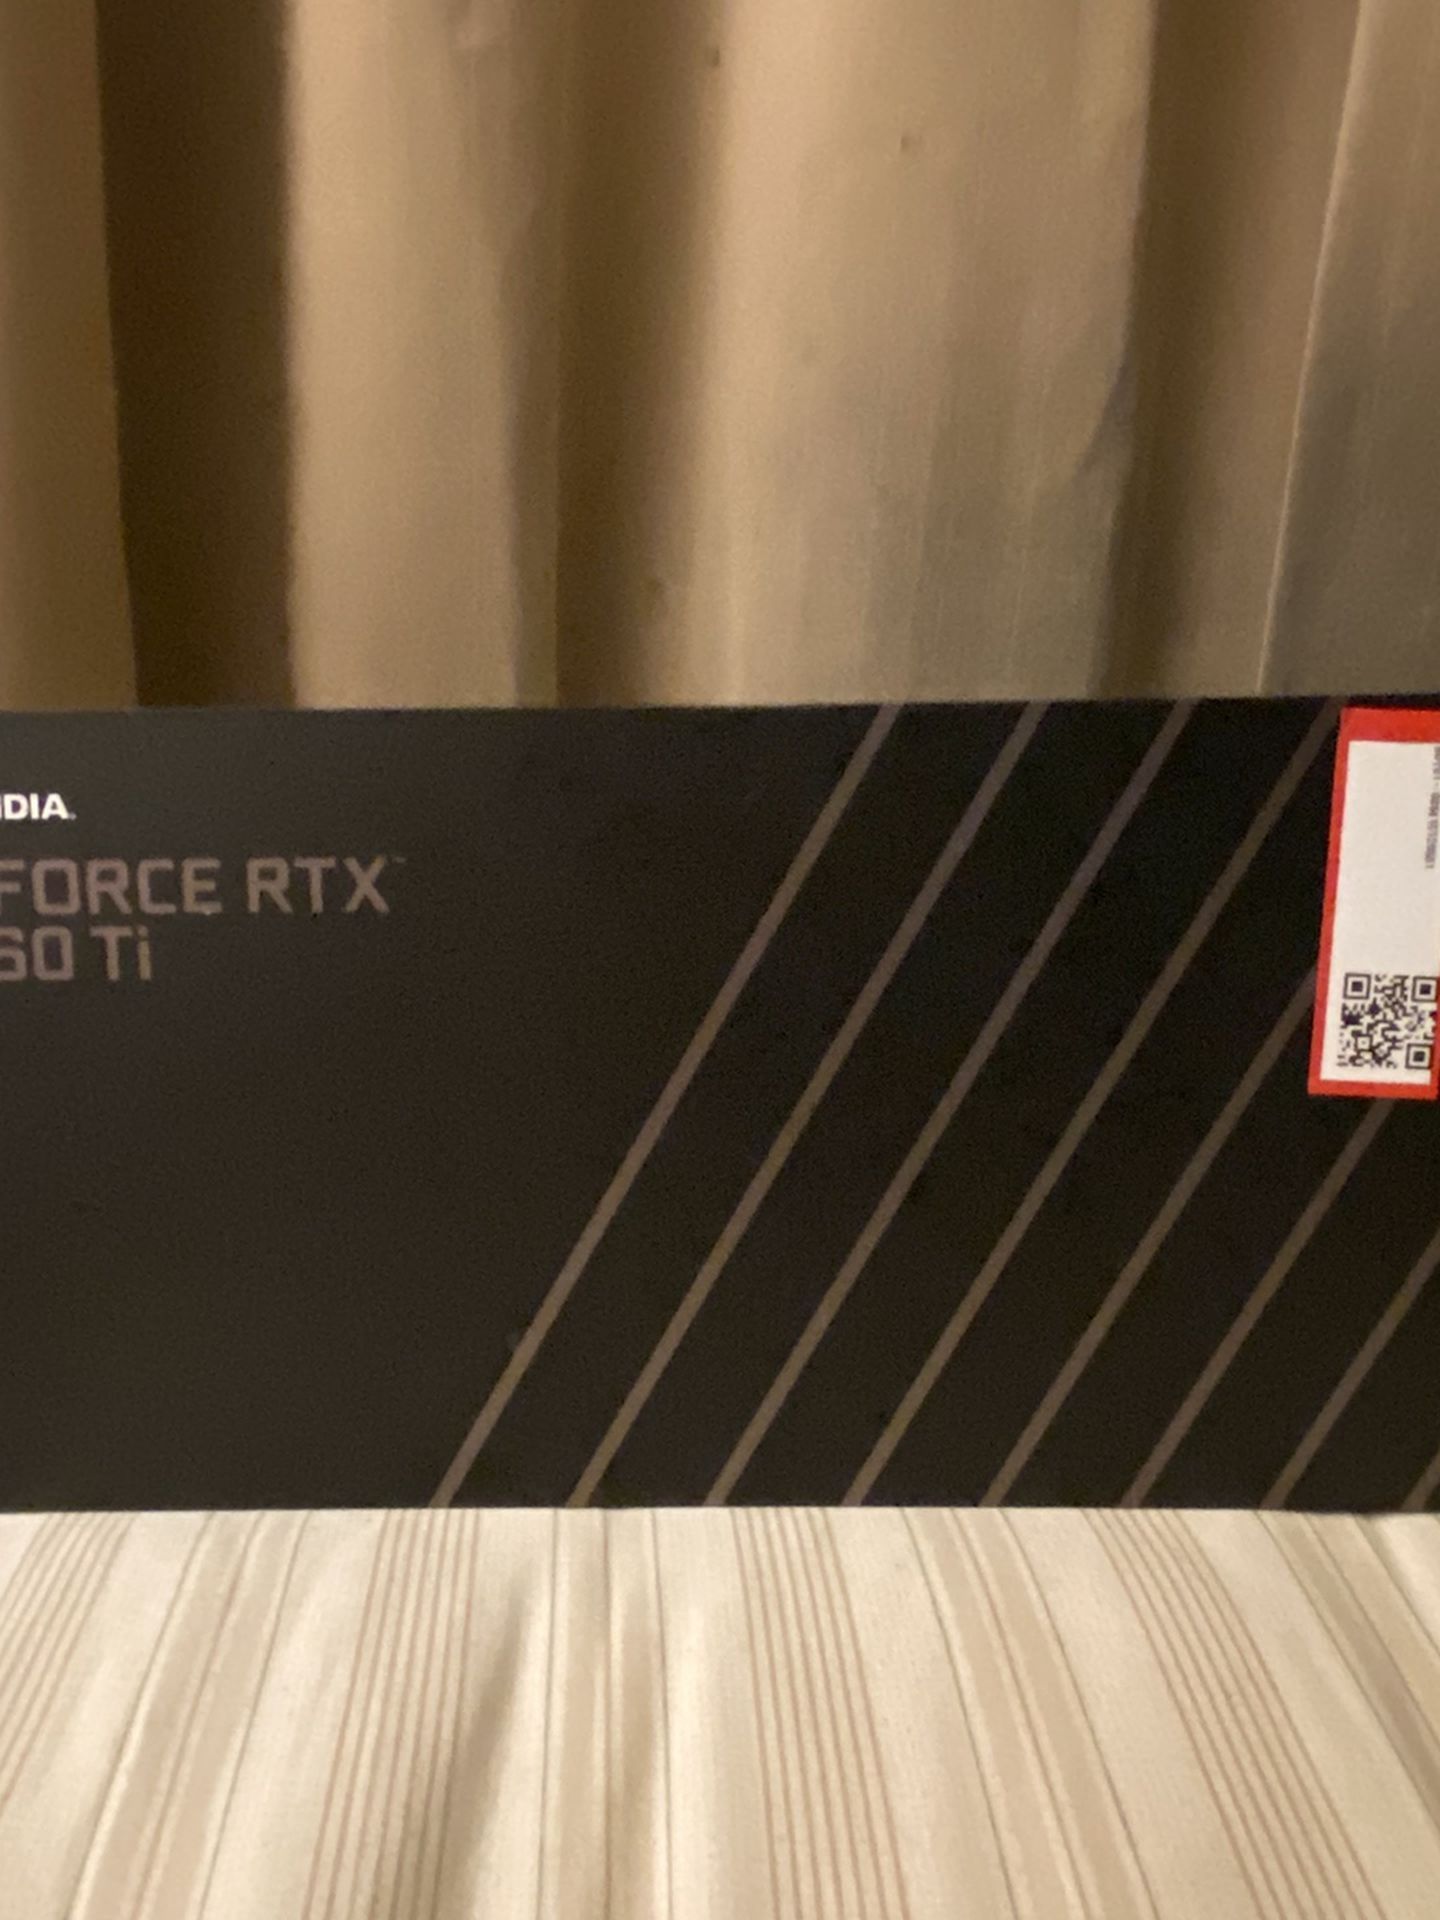 Nvidia GeForce RTX 3060 TI BRAND NEW UNOPENED AND SEALED